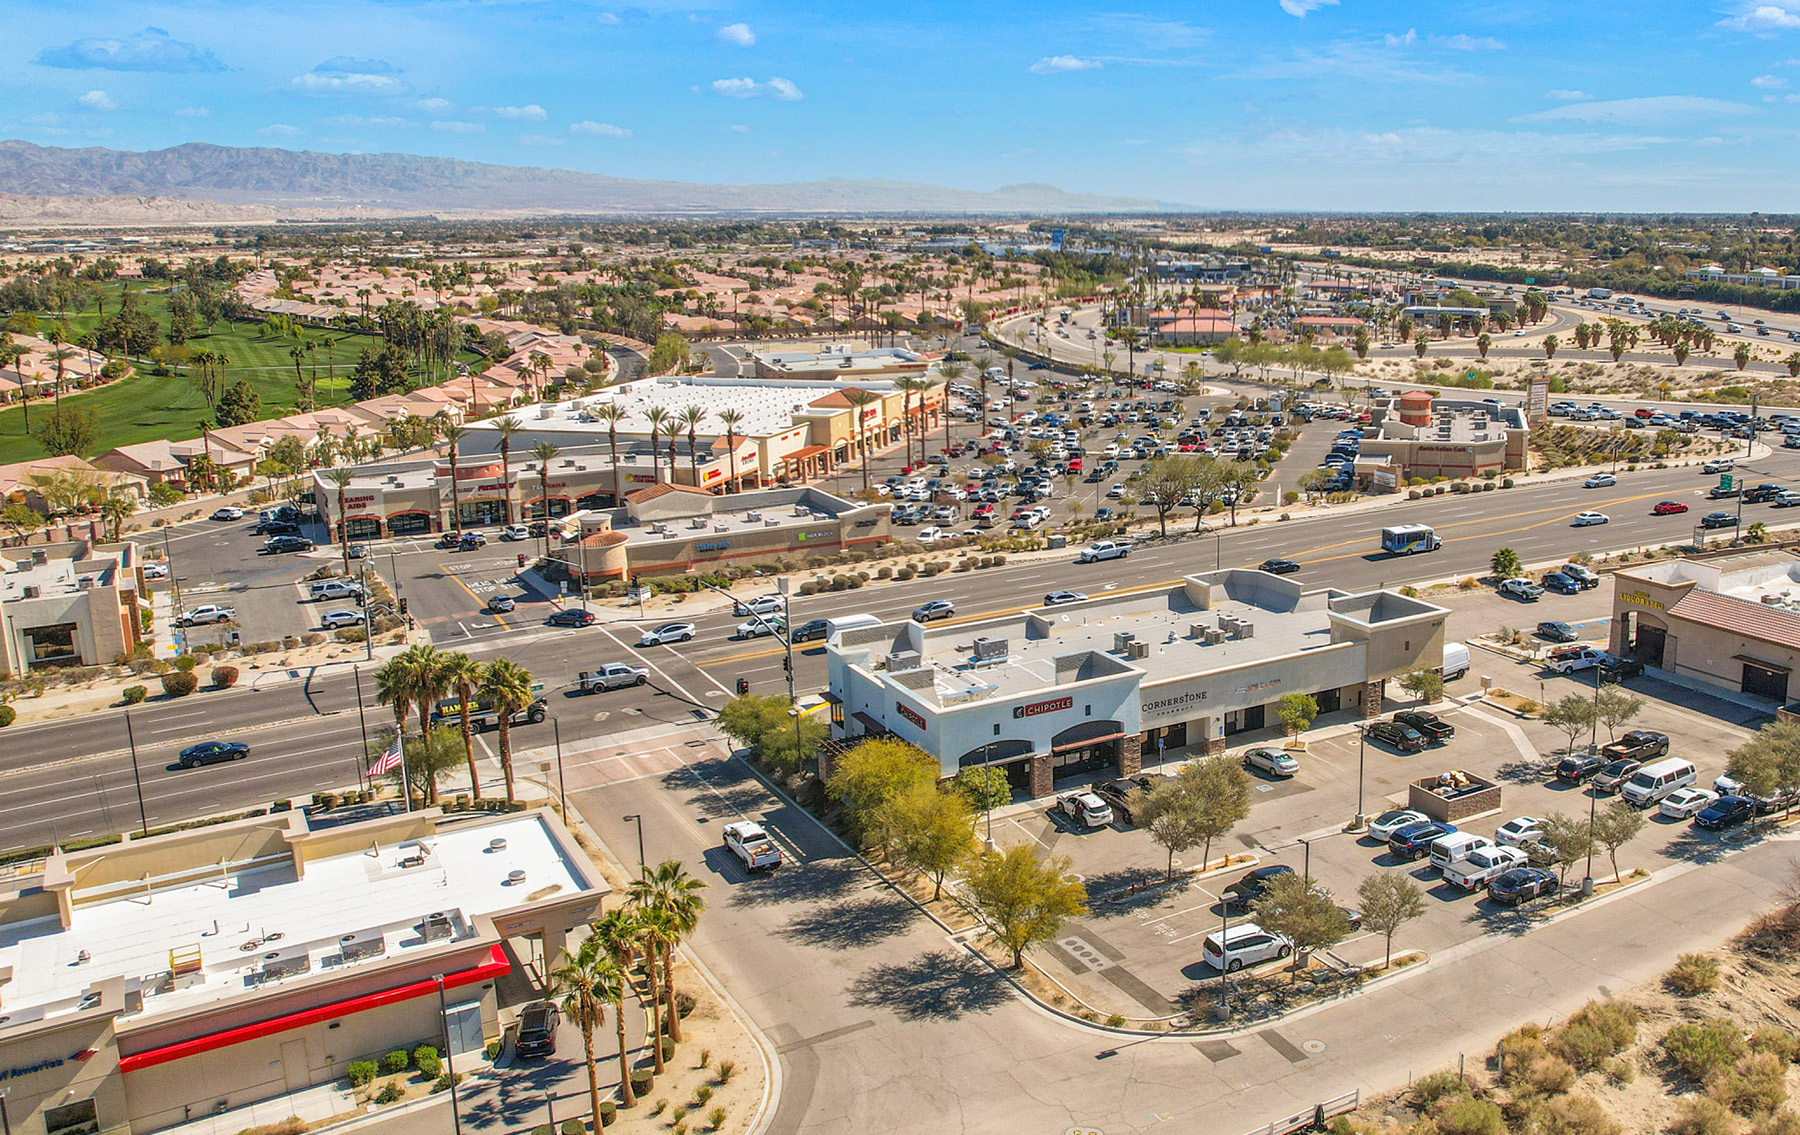 Hanley Investment Group Completes Sale of Chipotle Drive-Thru Anchored Pad in Palm Desert, Calif., for $3.86 Million